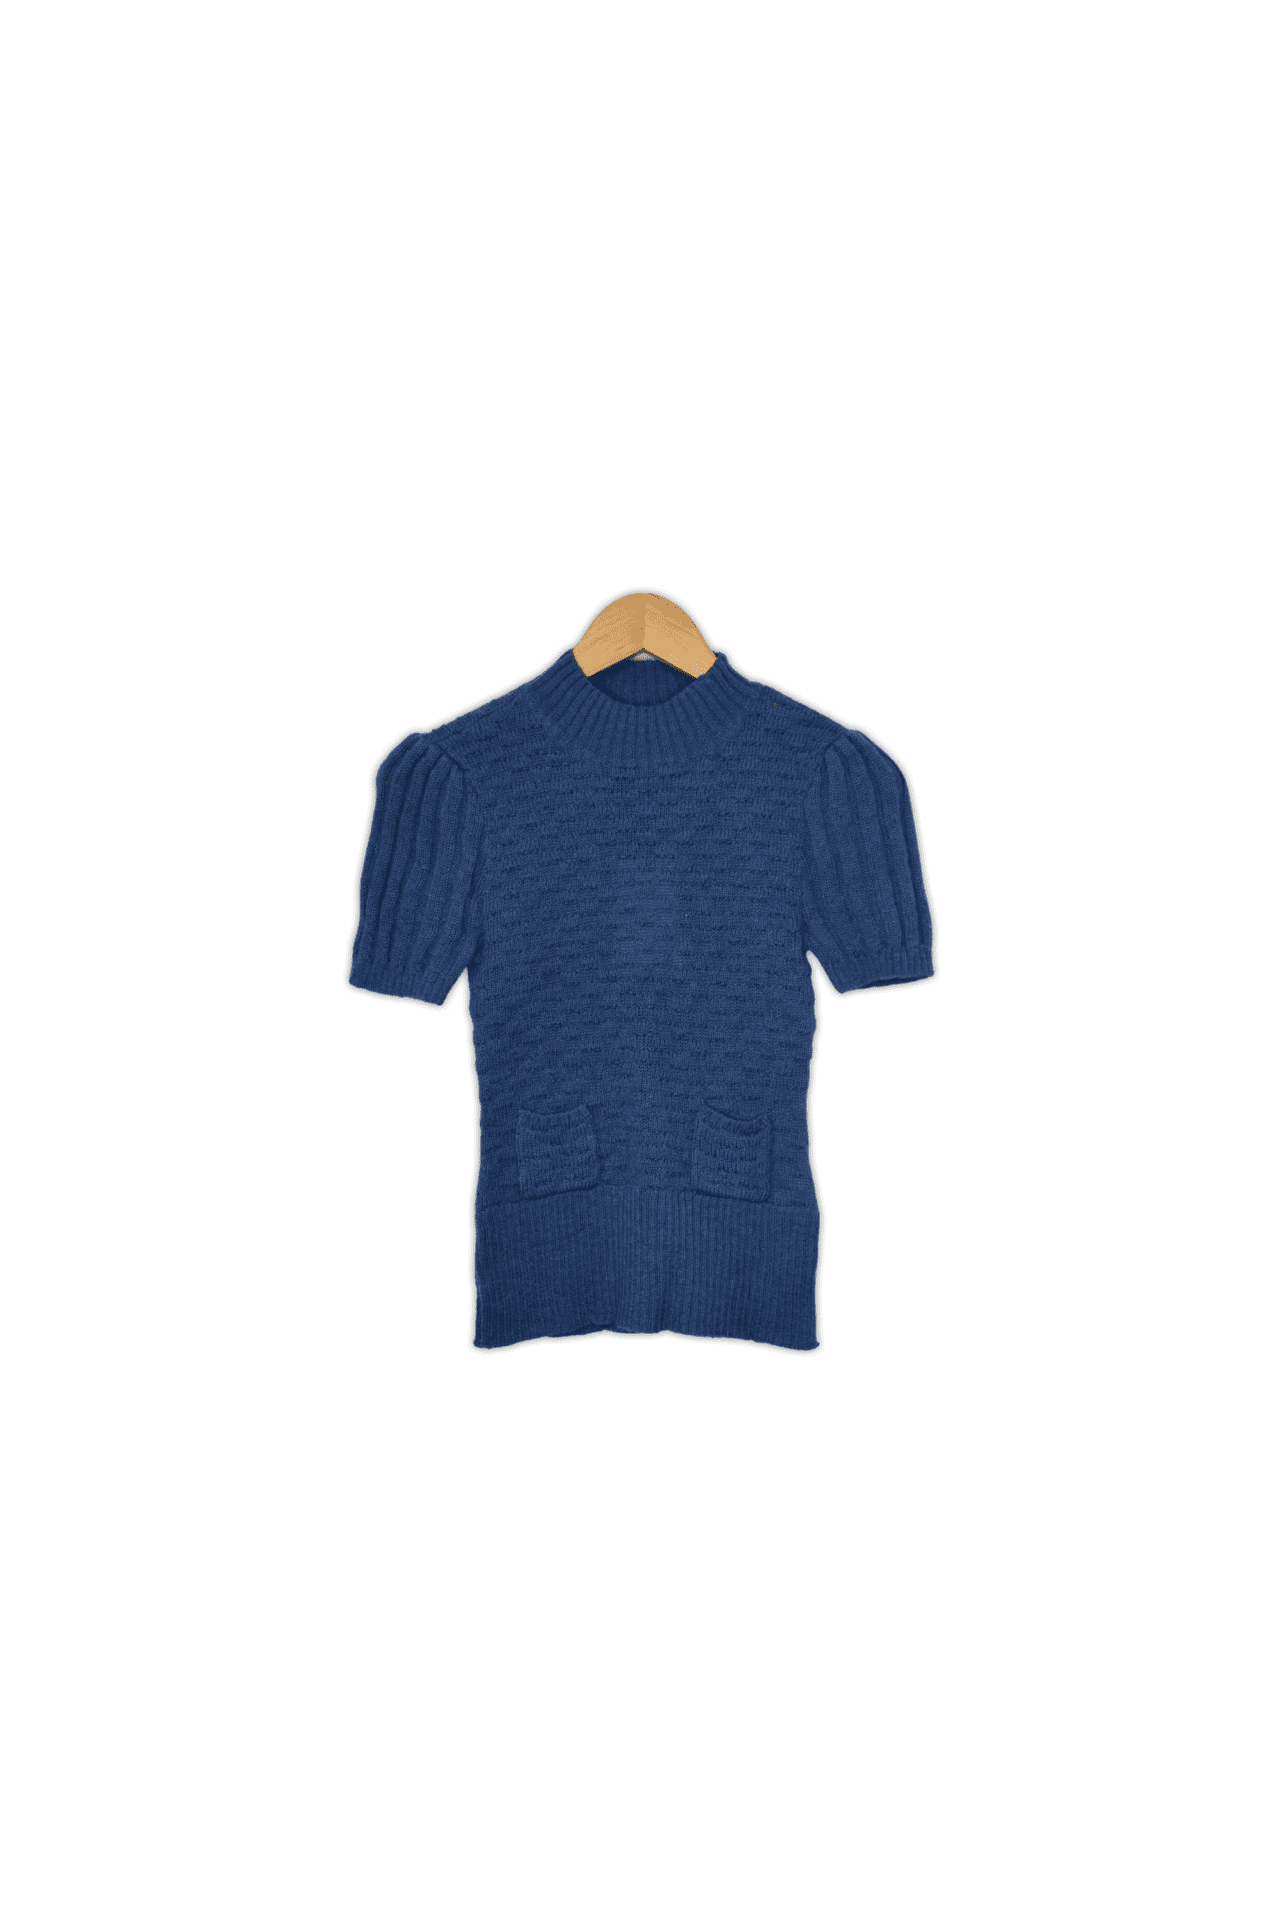 Small, blue, wool, top